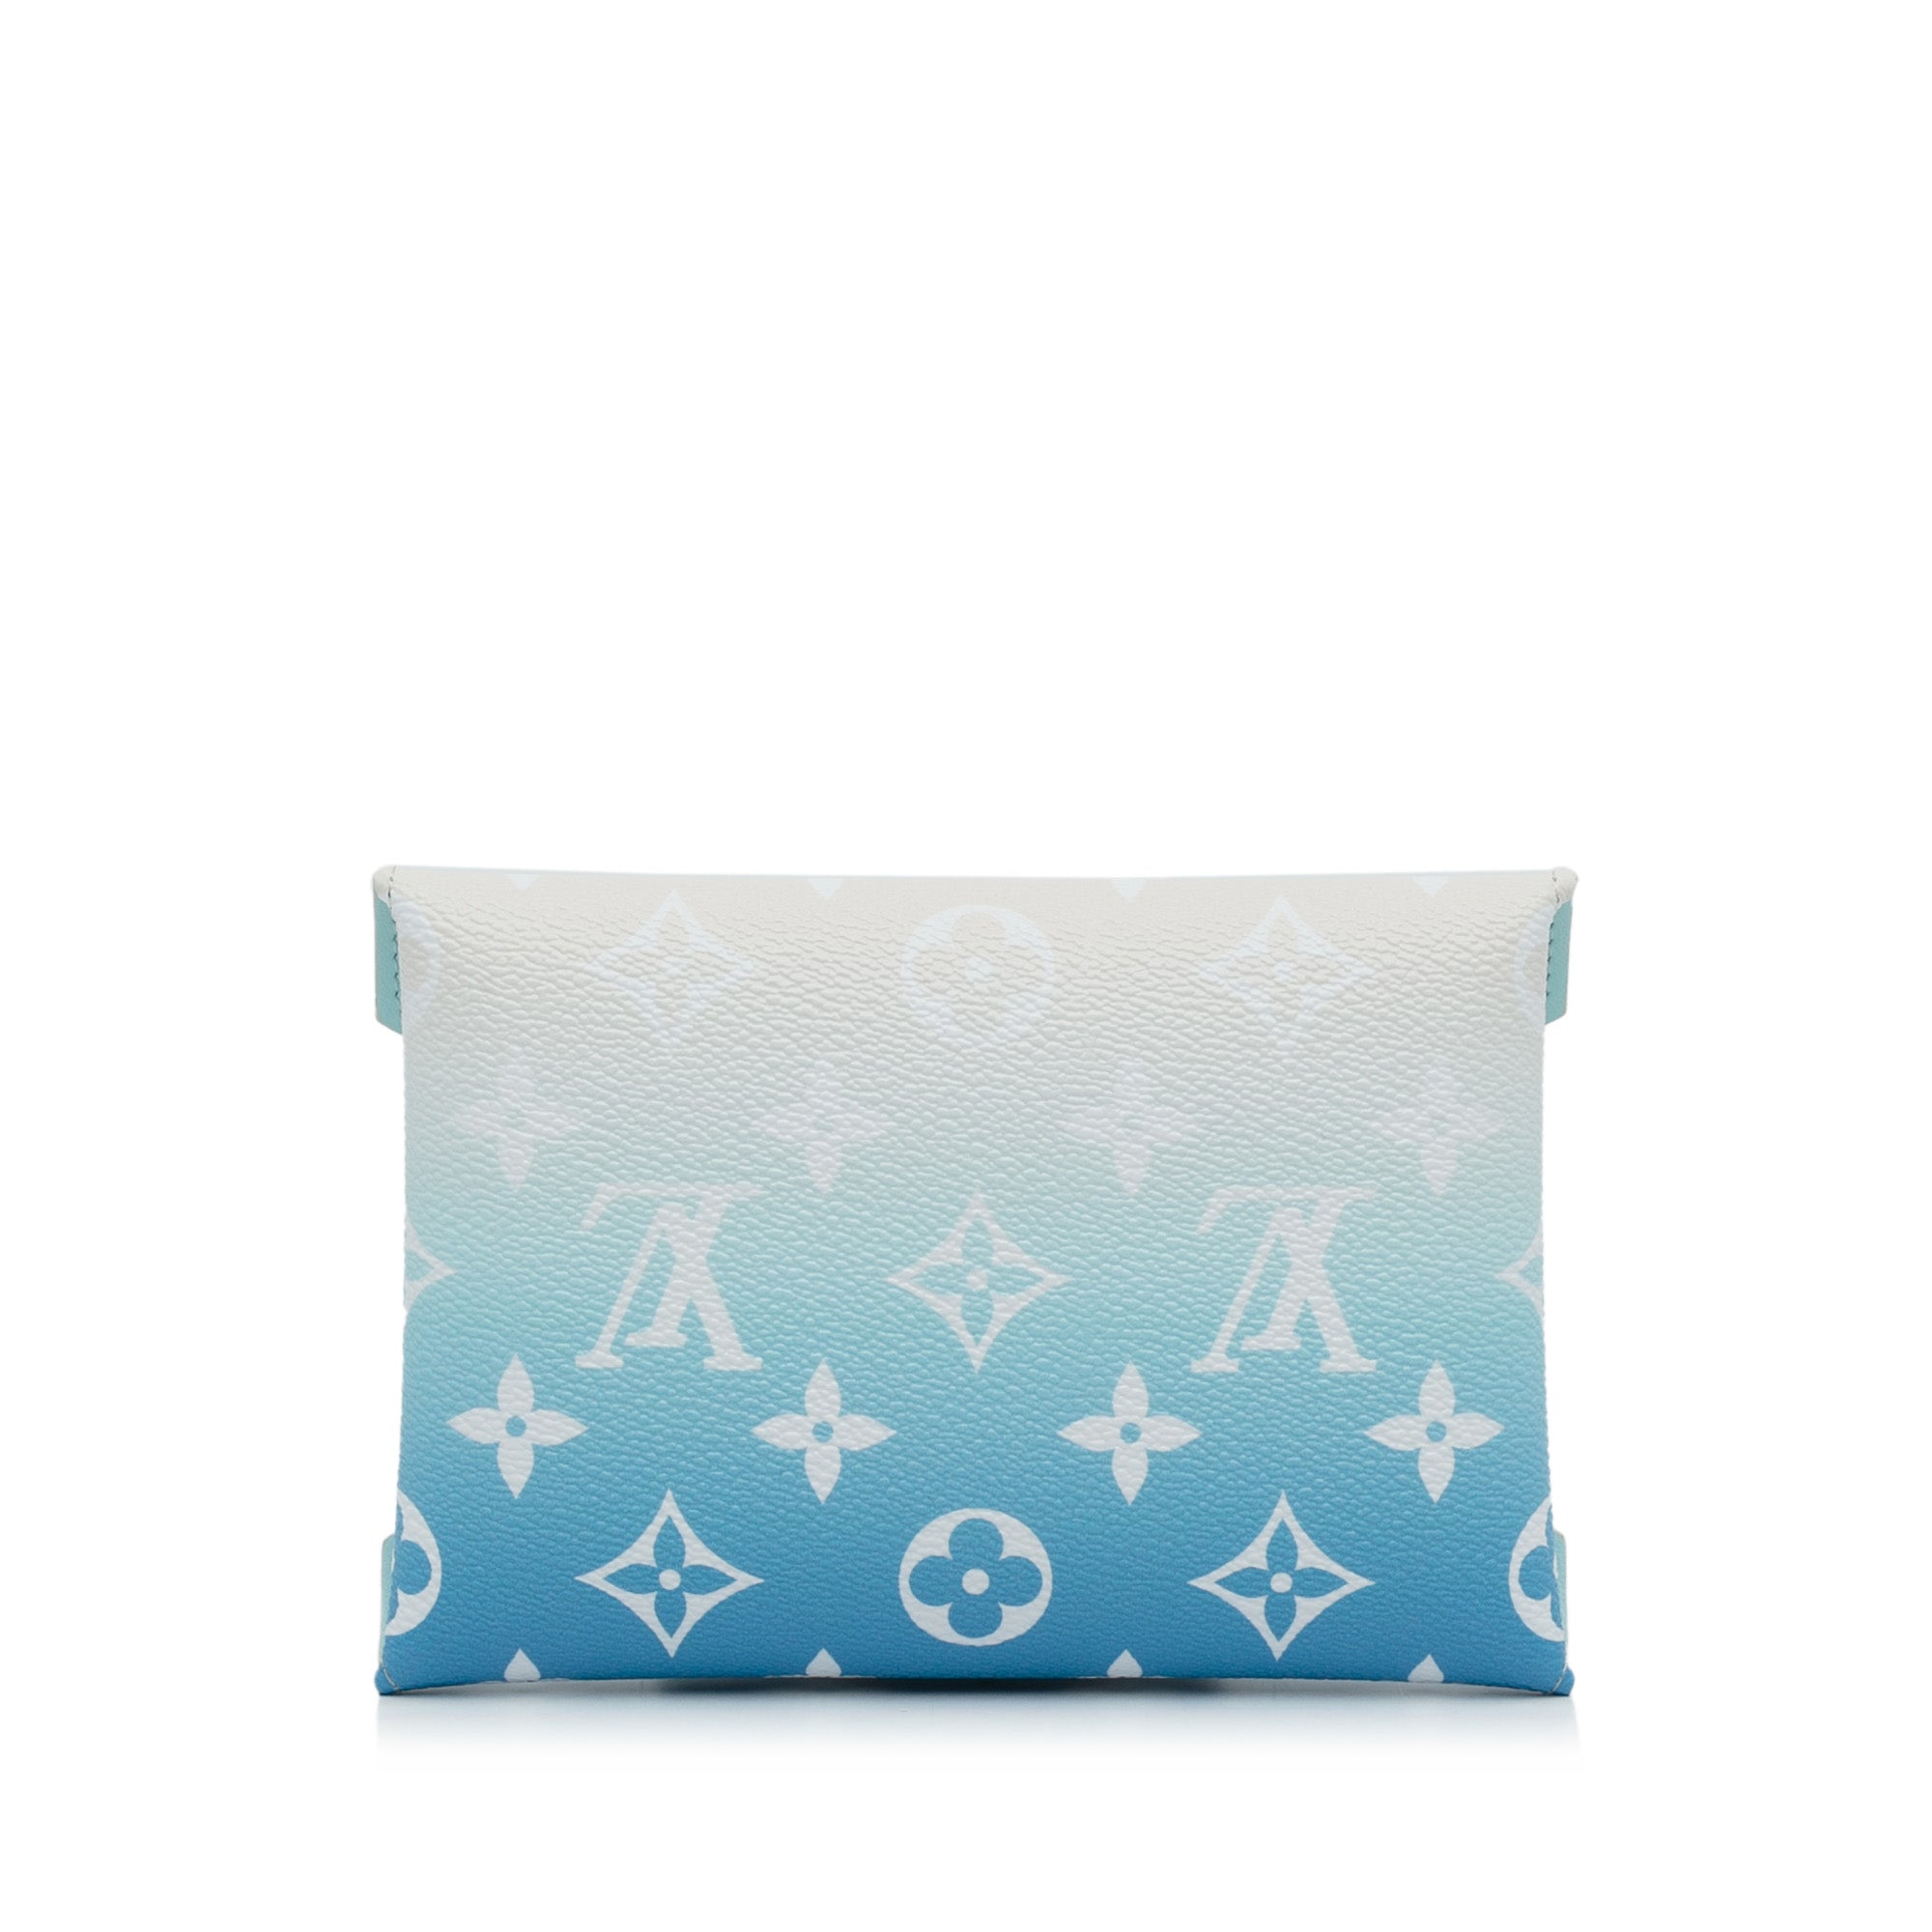 Blue Louis Vuitton Monogram By The Pool Kirigami Pouch – Designer Revival